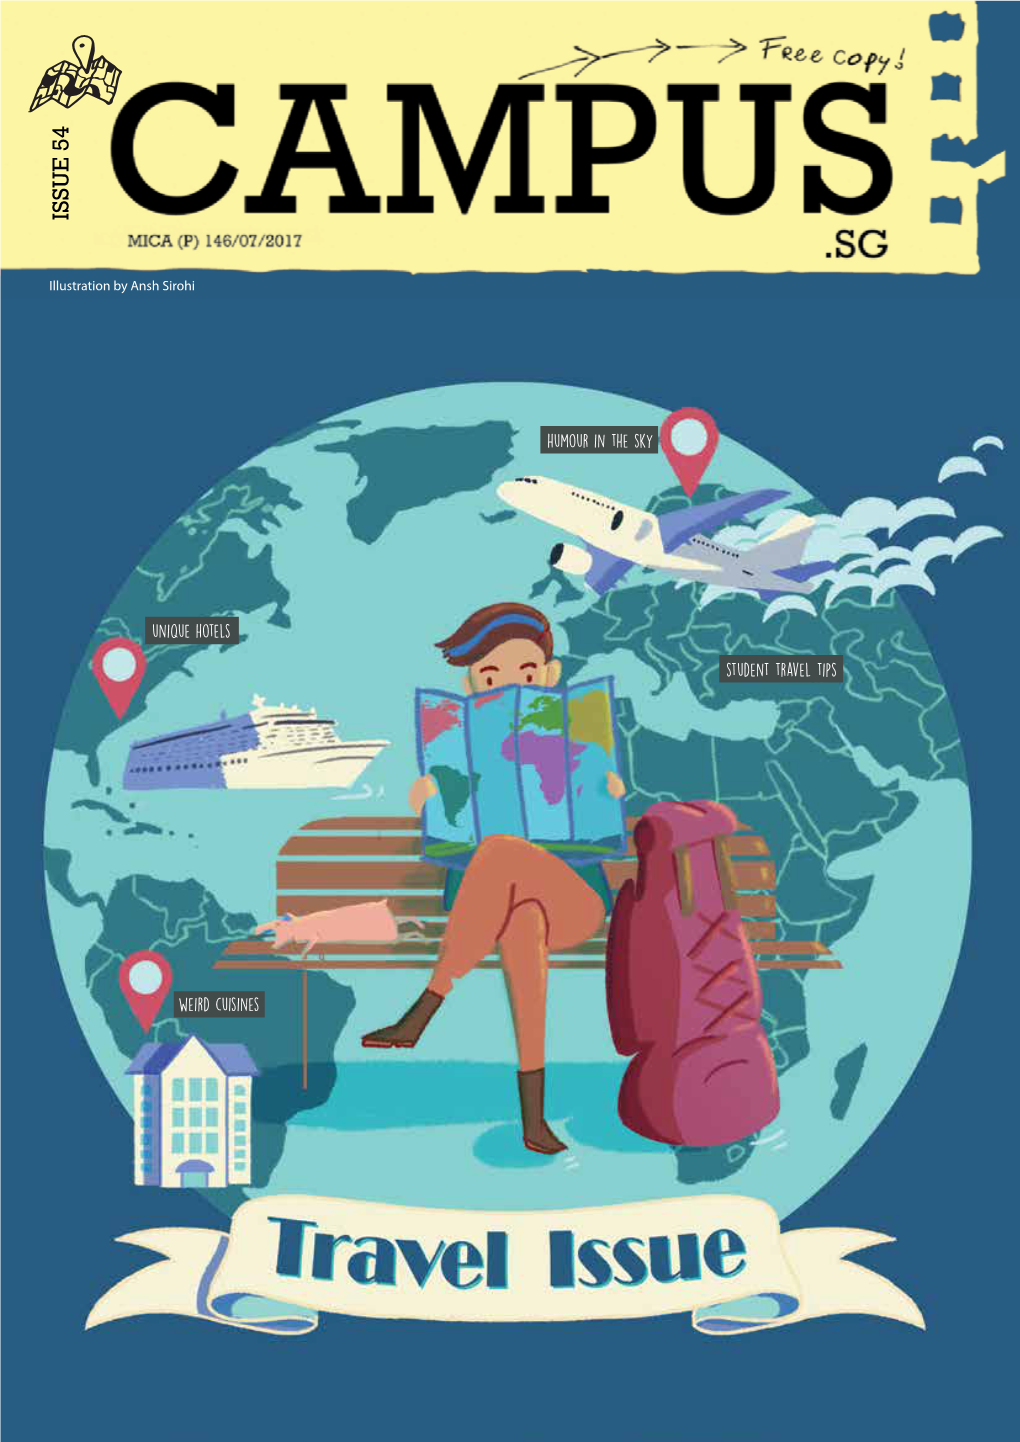 ISSUE 54 Cover.Pdf 111/6/186:12Pm Unique Hotels Weird Cuisines Humour Inthe Sky Student Travel Tips IFC Waseda.Pdf 1 6/6/18 4:08 Pm